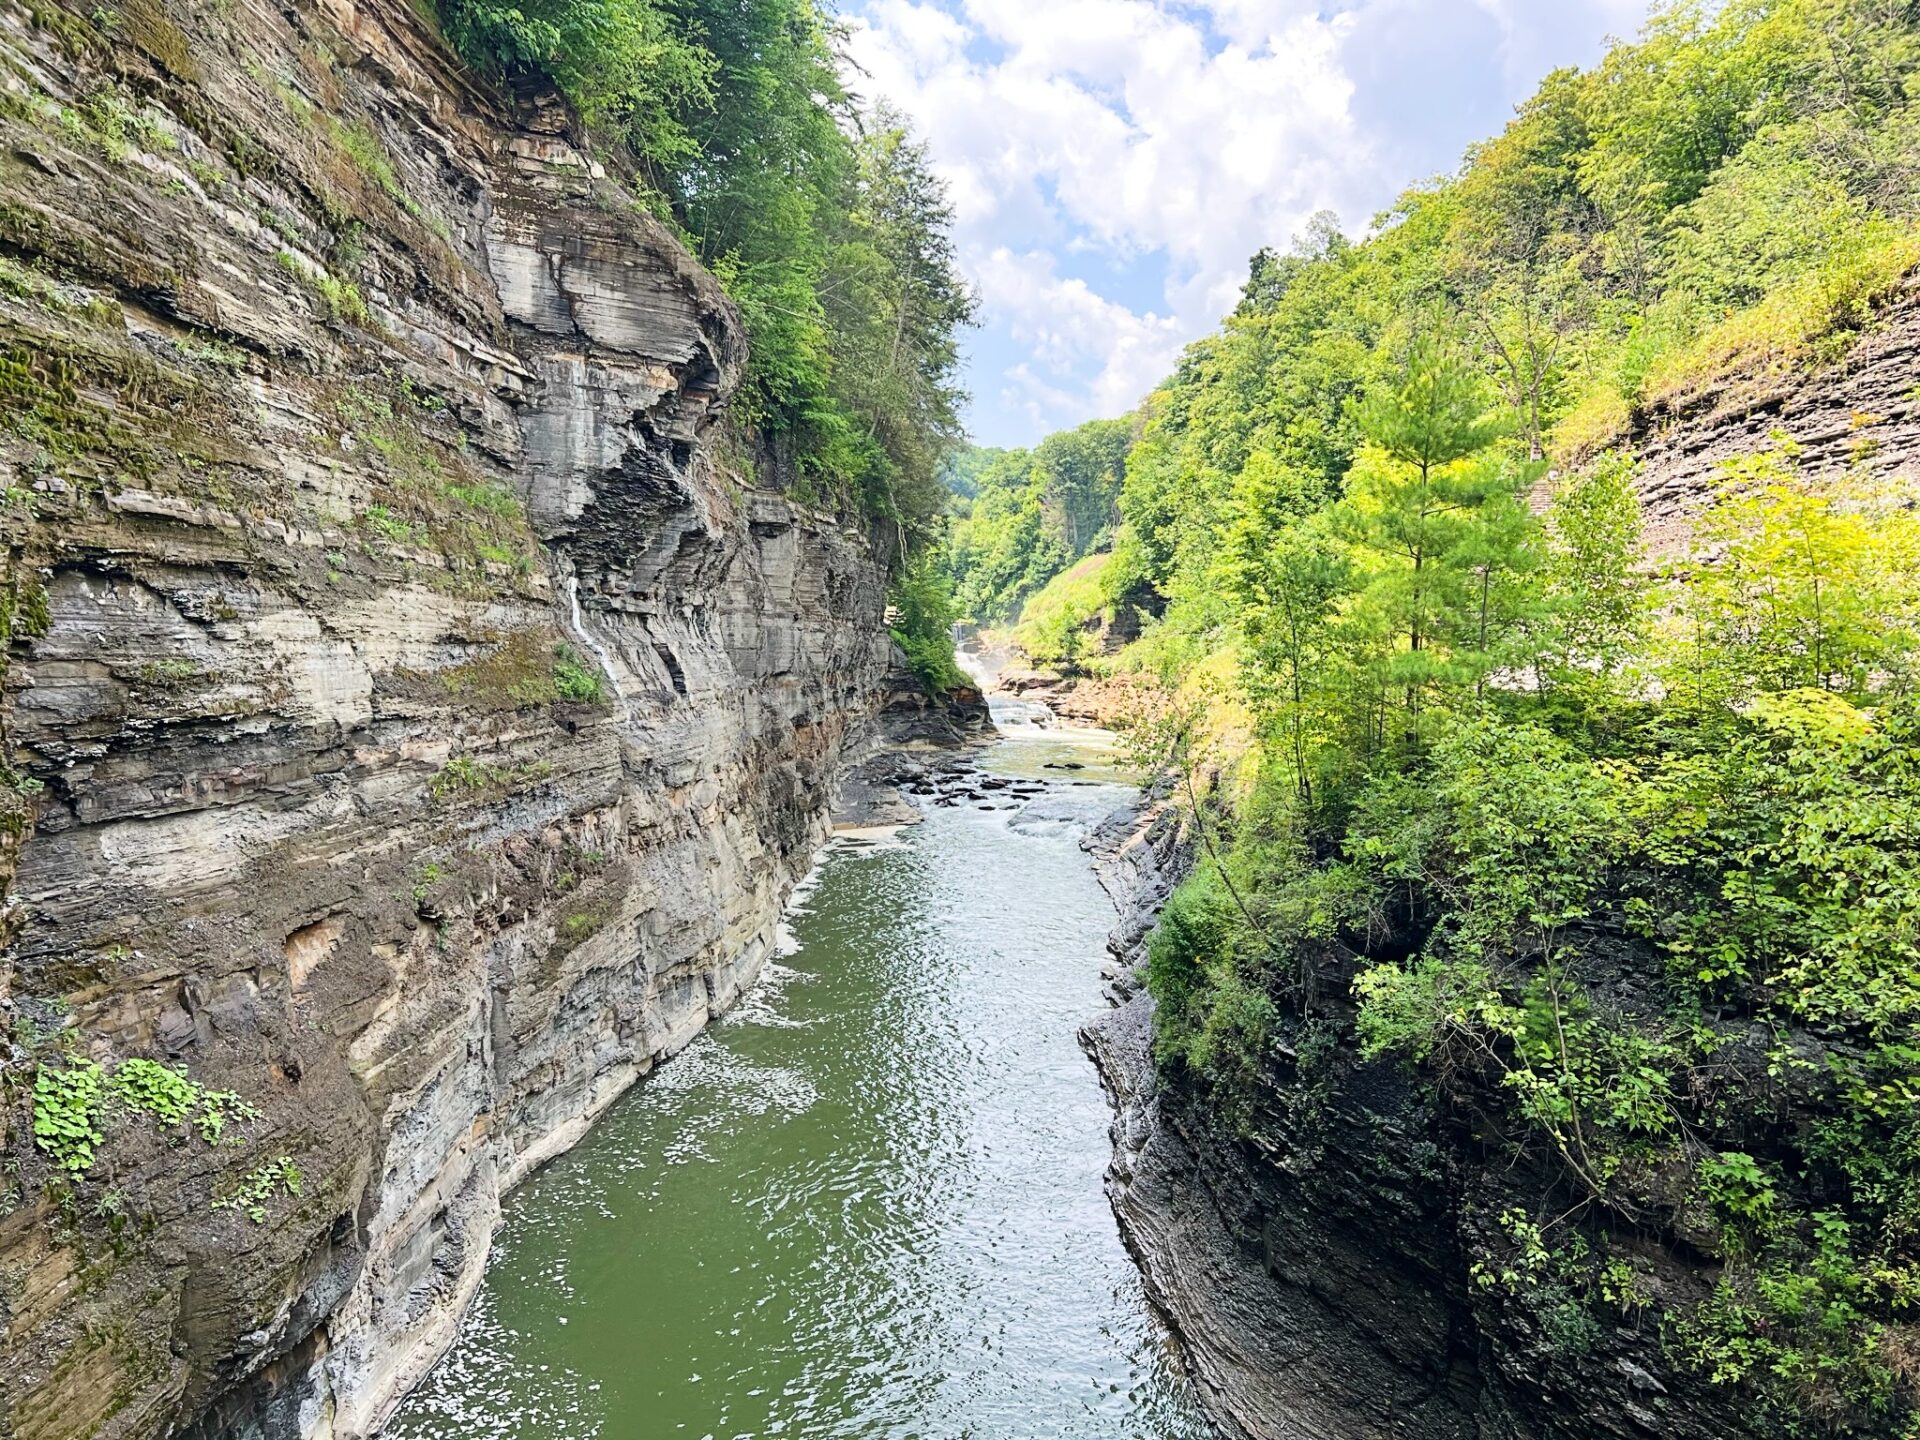 Visiting Letchworth State Park in New York (“Grand Canyon of the East?”)